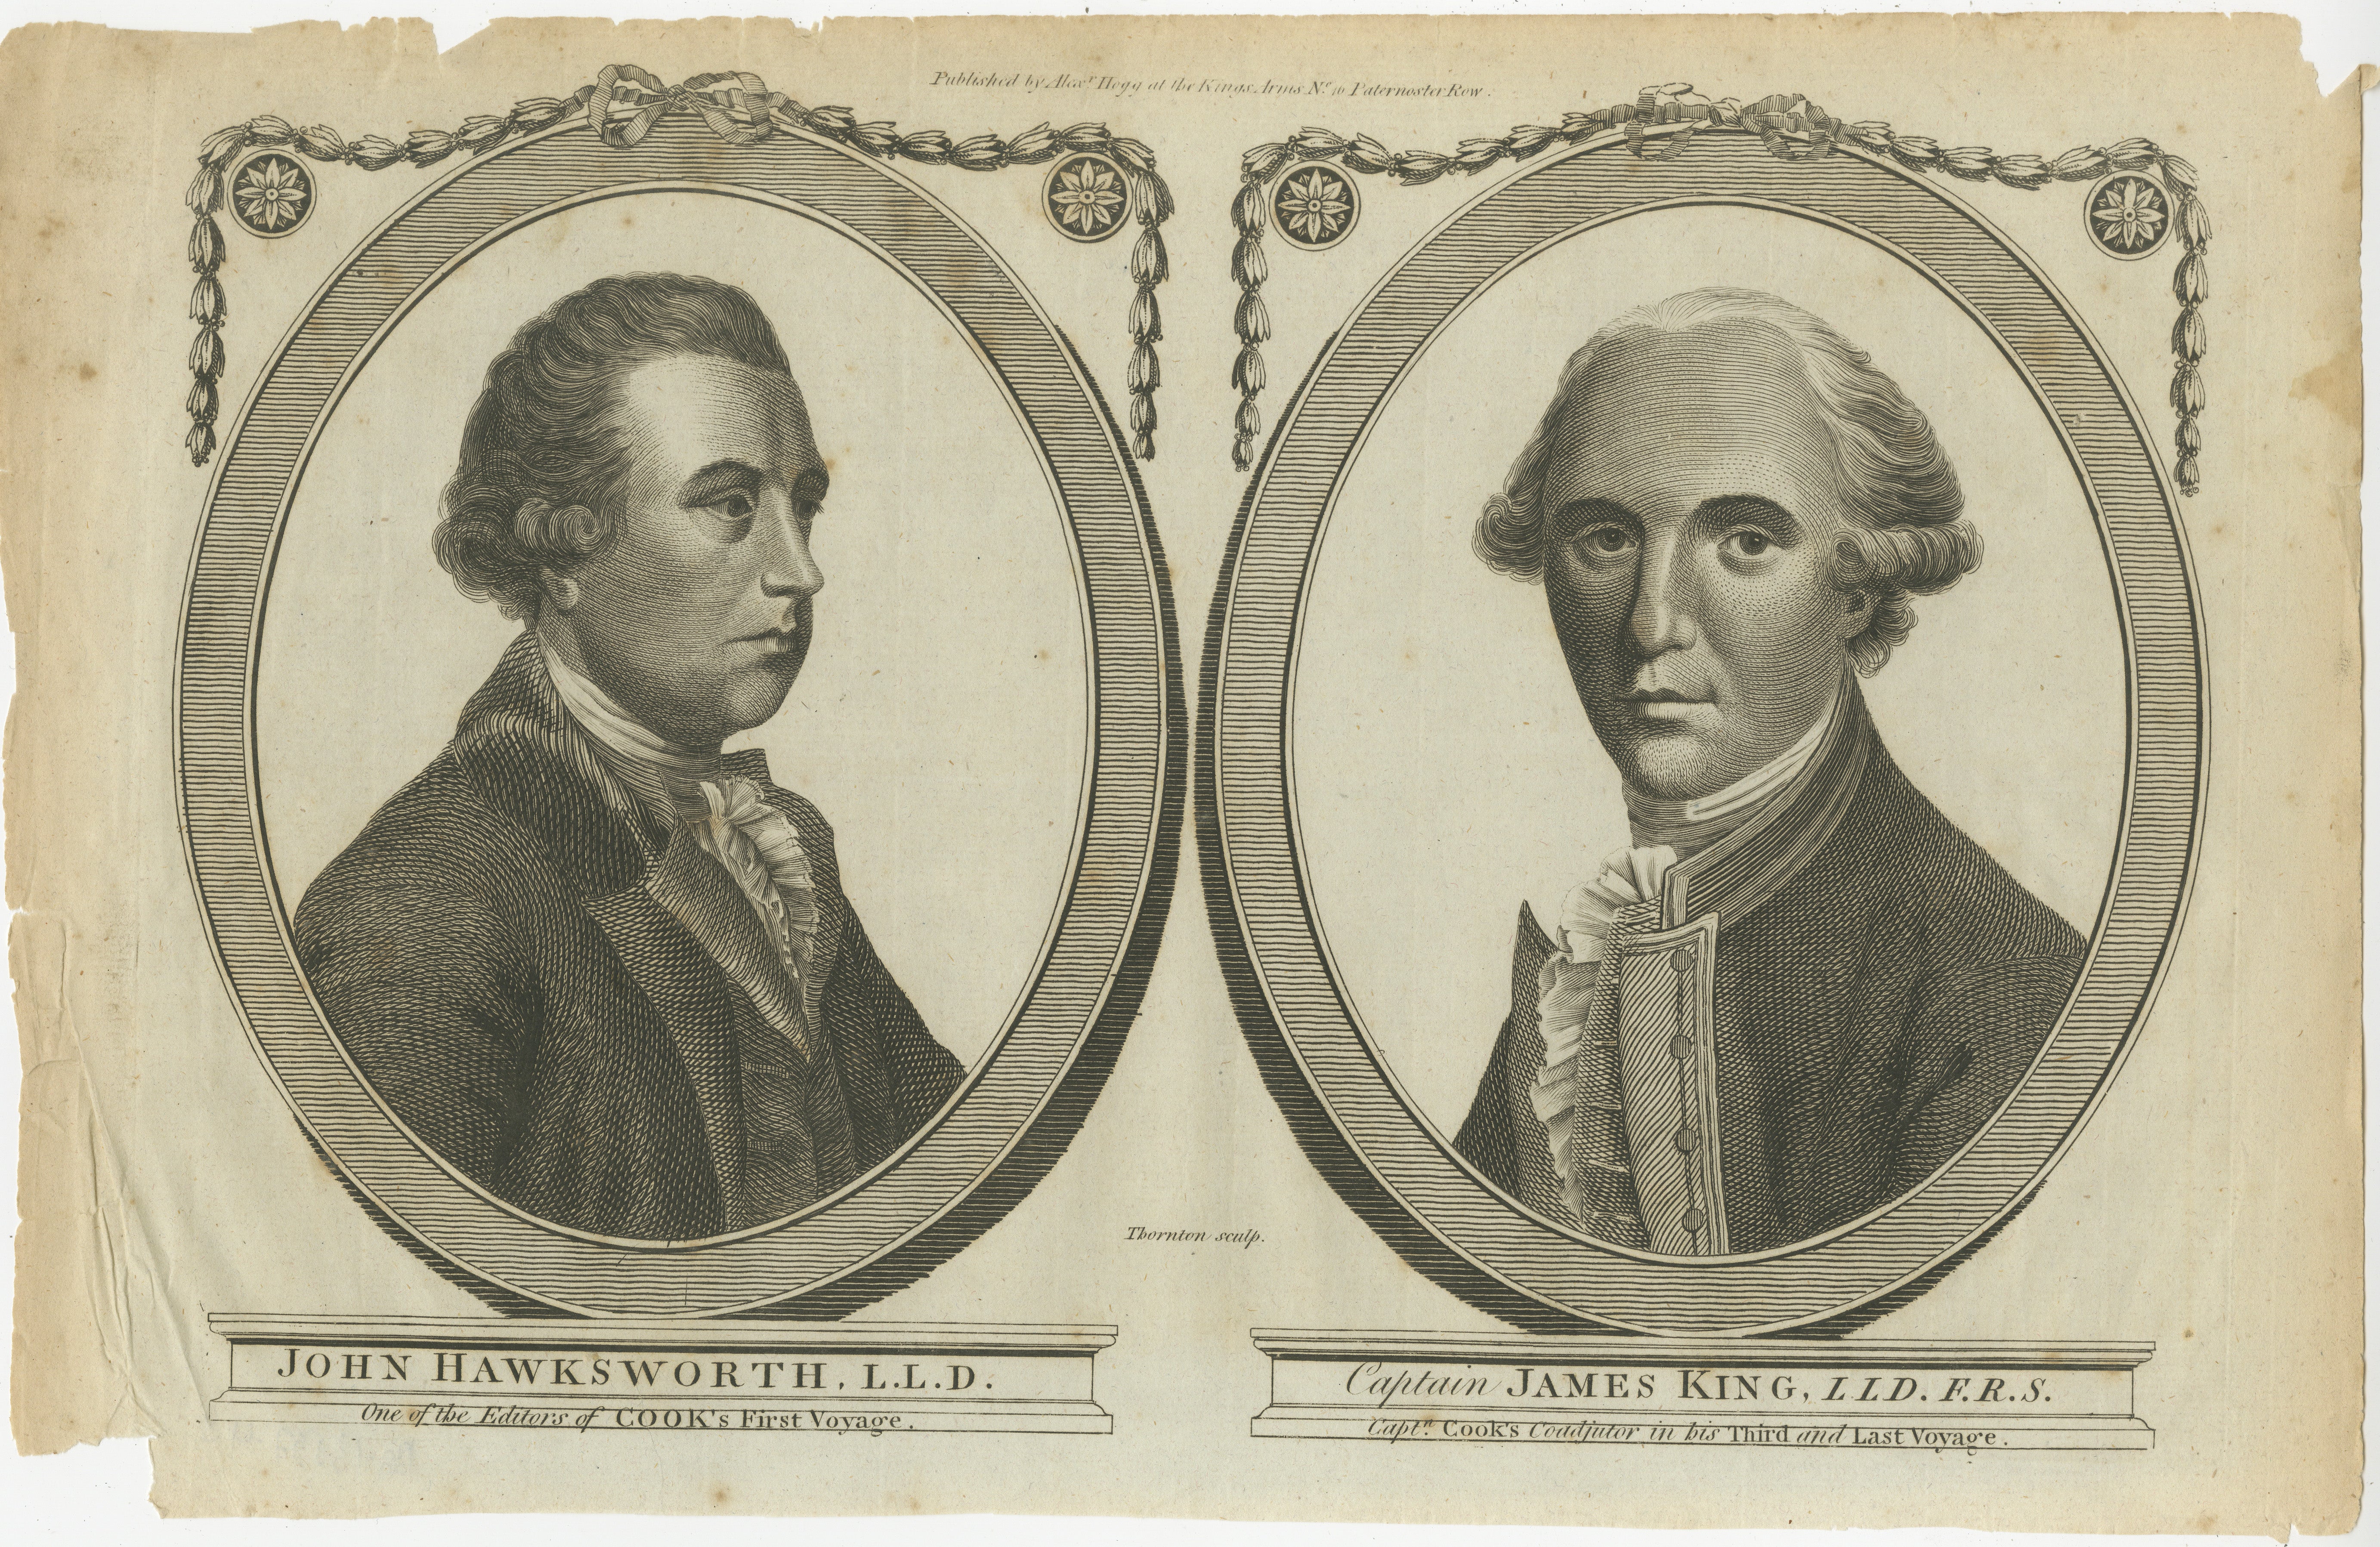 Commemorative Portraits of John Hawkesworth and Captain James King by Thornton

This detailed engraving, crafted by the artist Thornton, presents a pair of oval portraits depicting two influential figures associated with Captain James Cook's